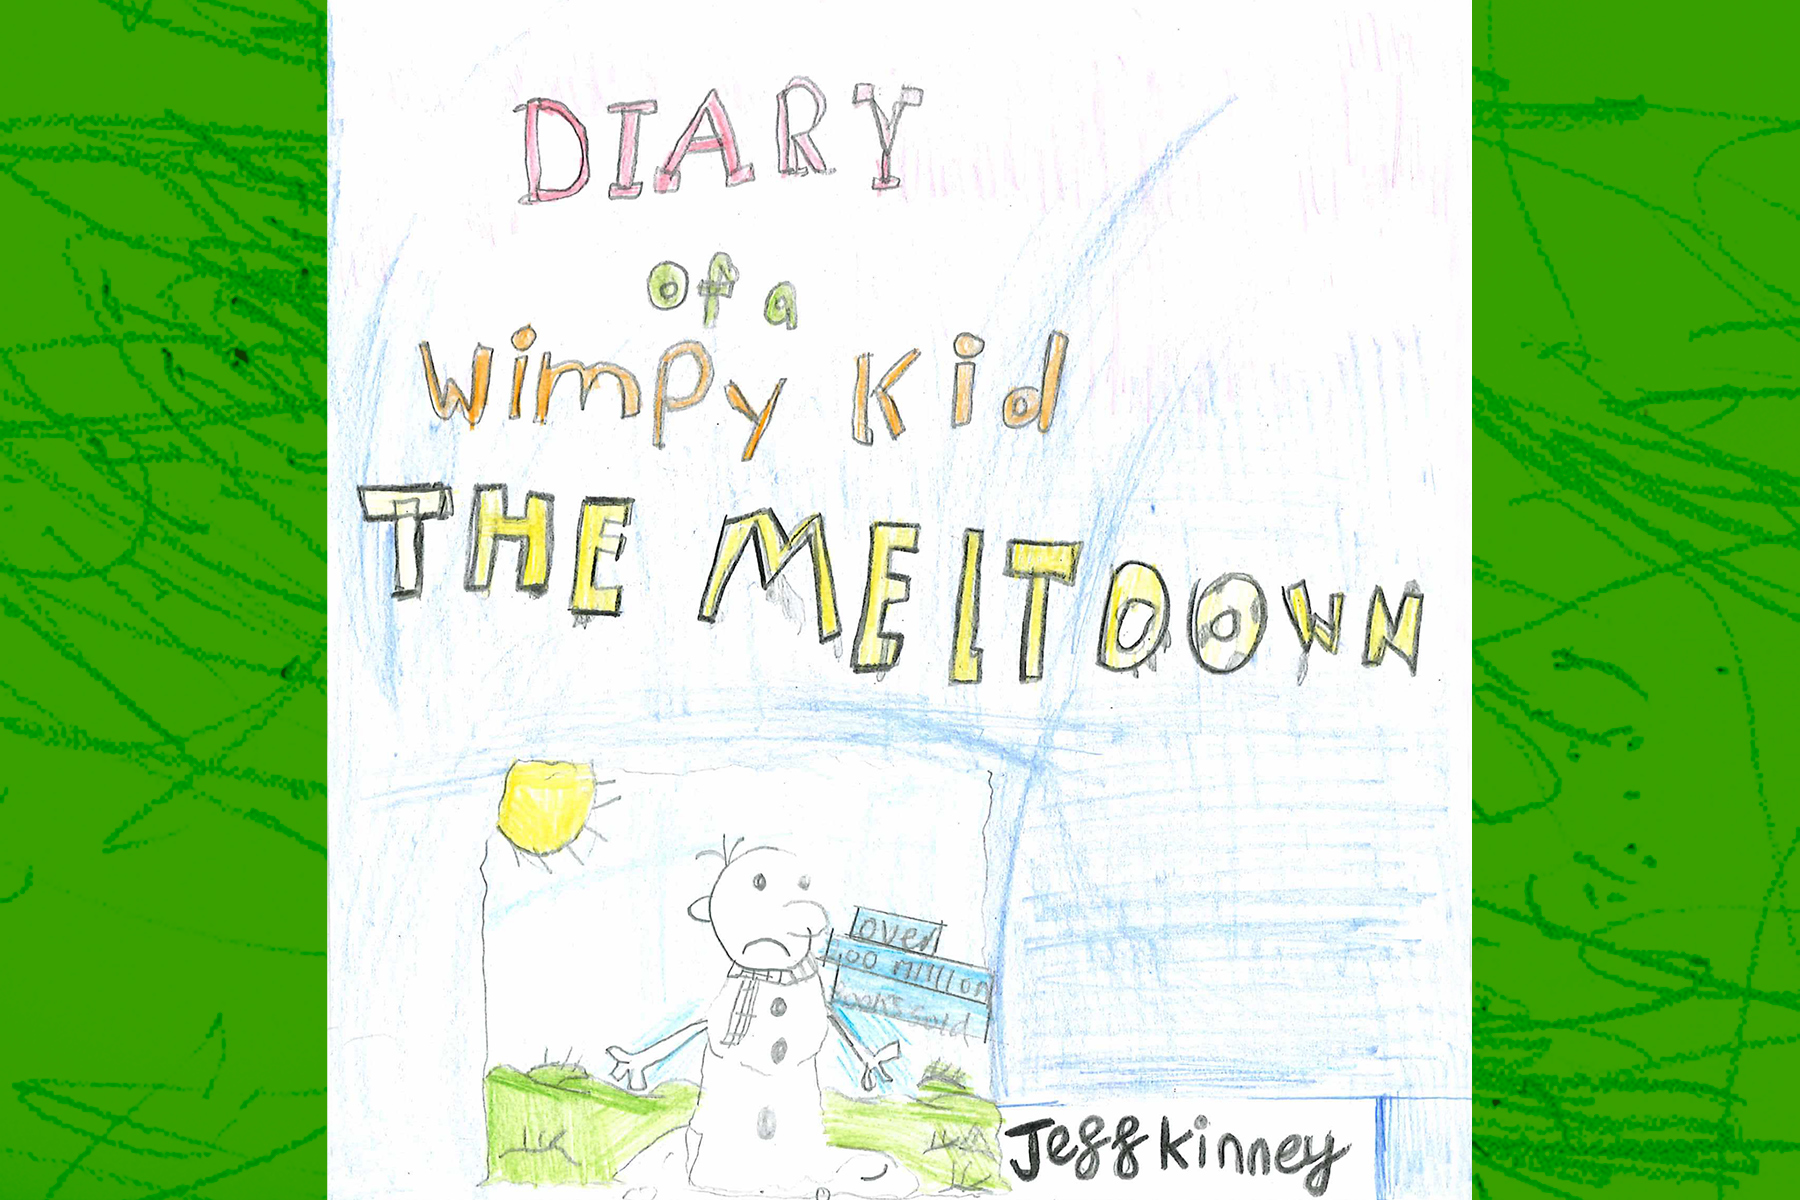 The diary of a wimpy kid meltdown cover